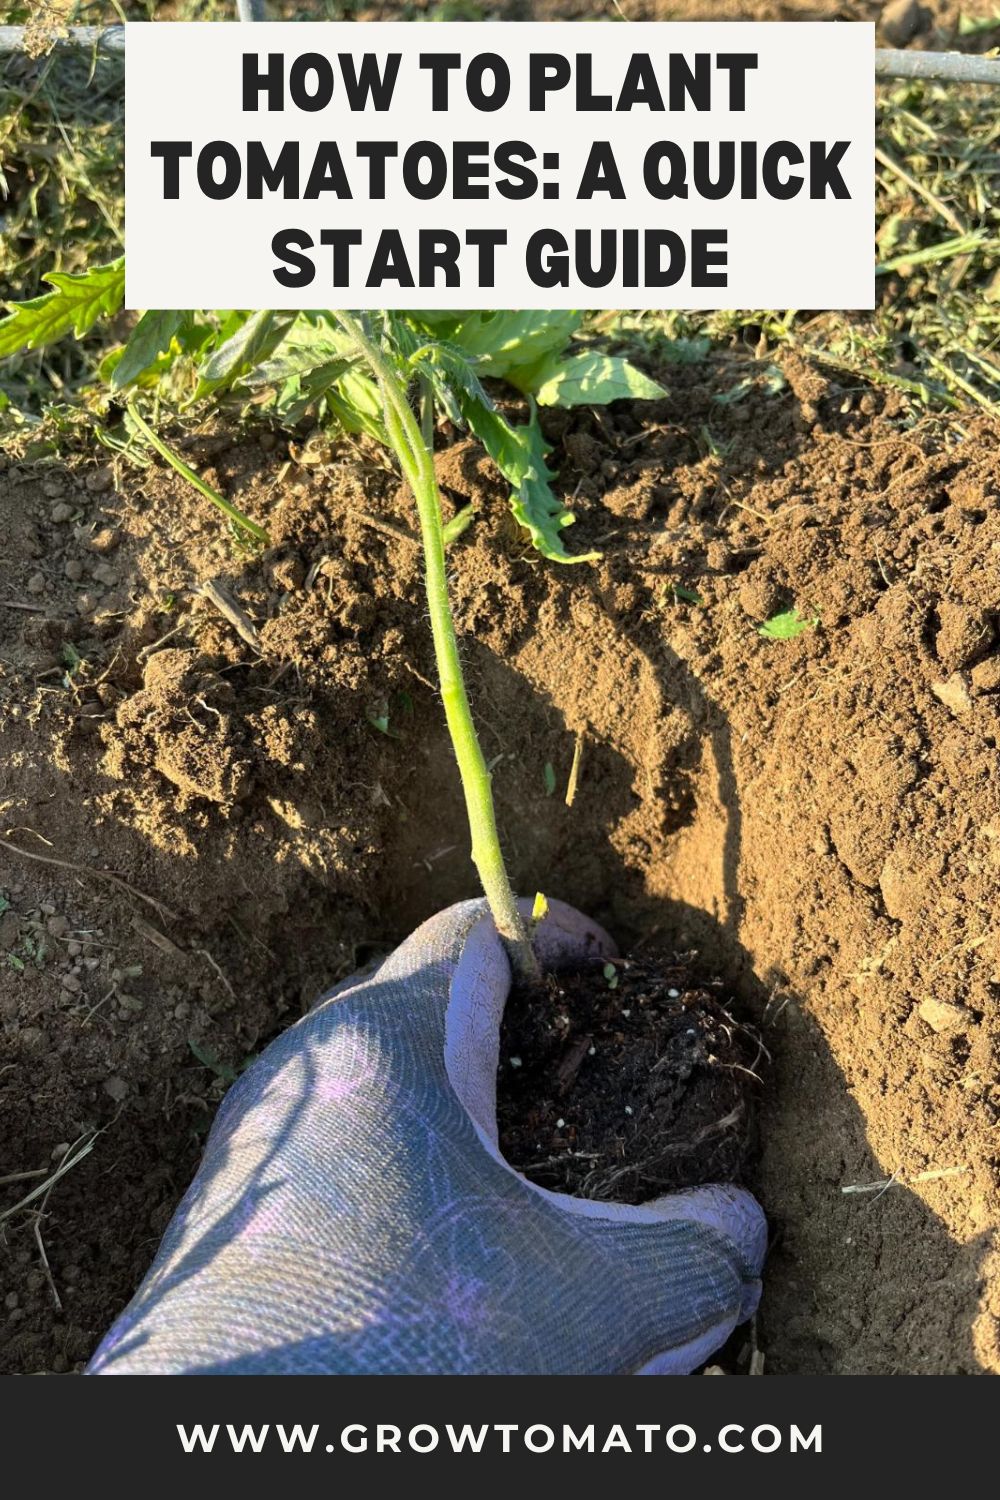 How To Plant Tomatoes: A Quick Start Guide pinterest image.